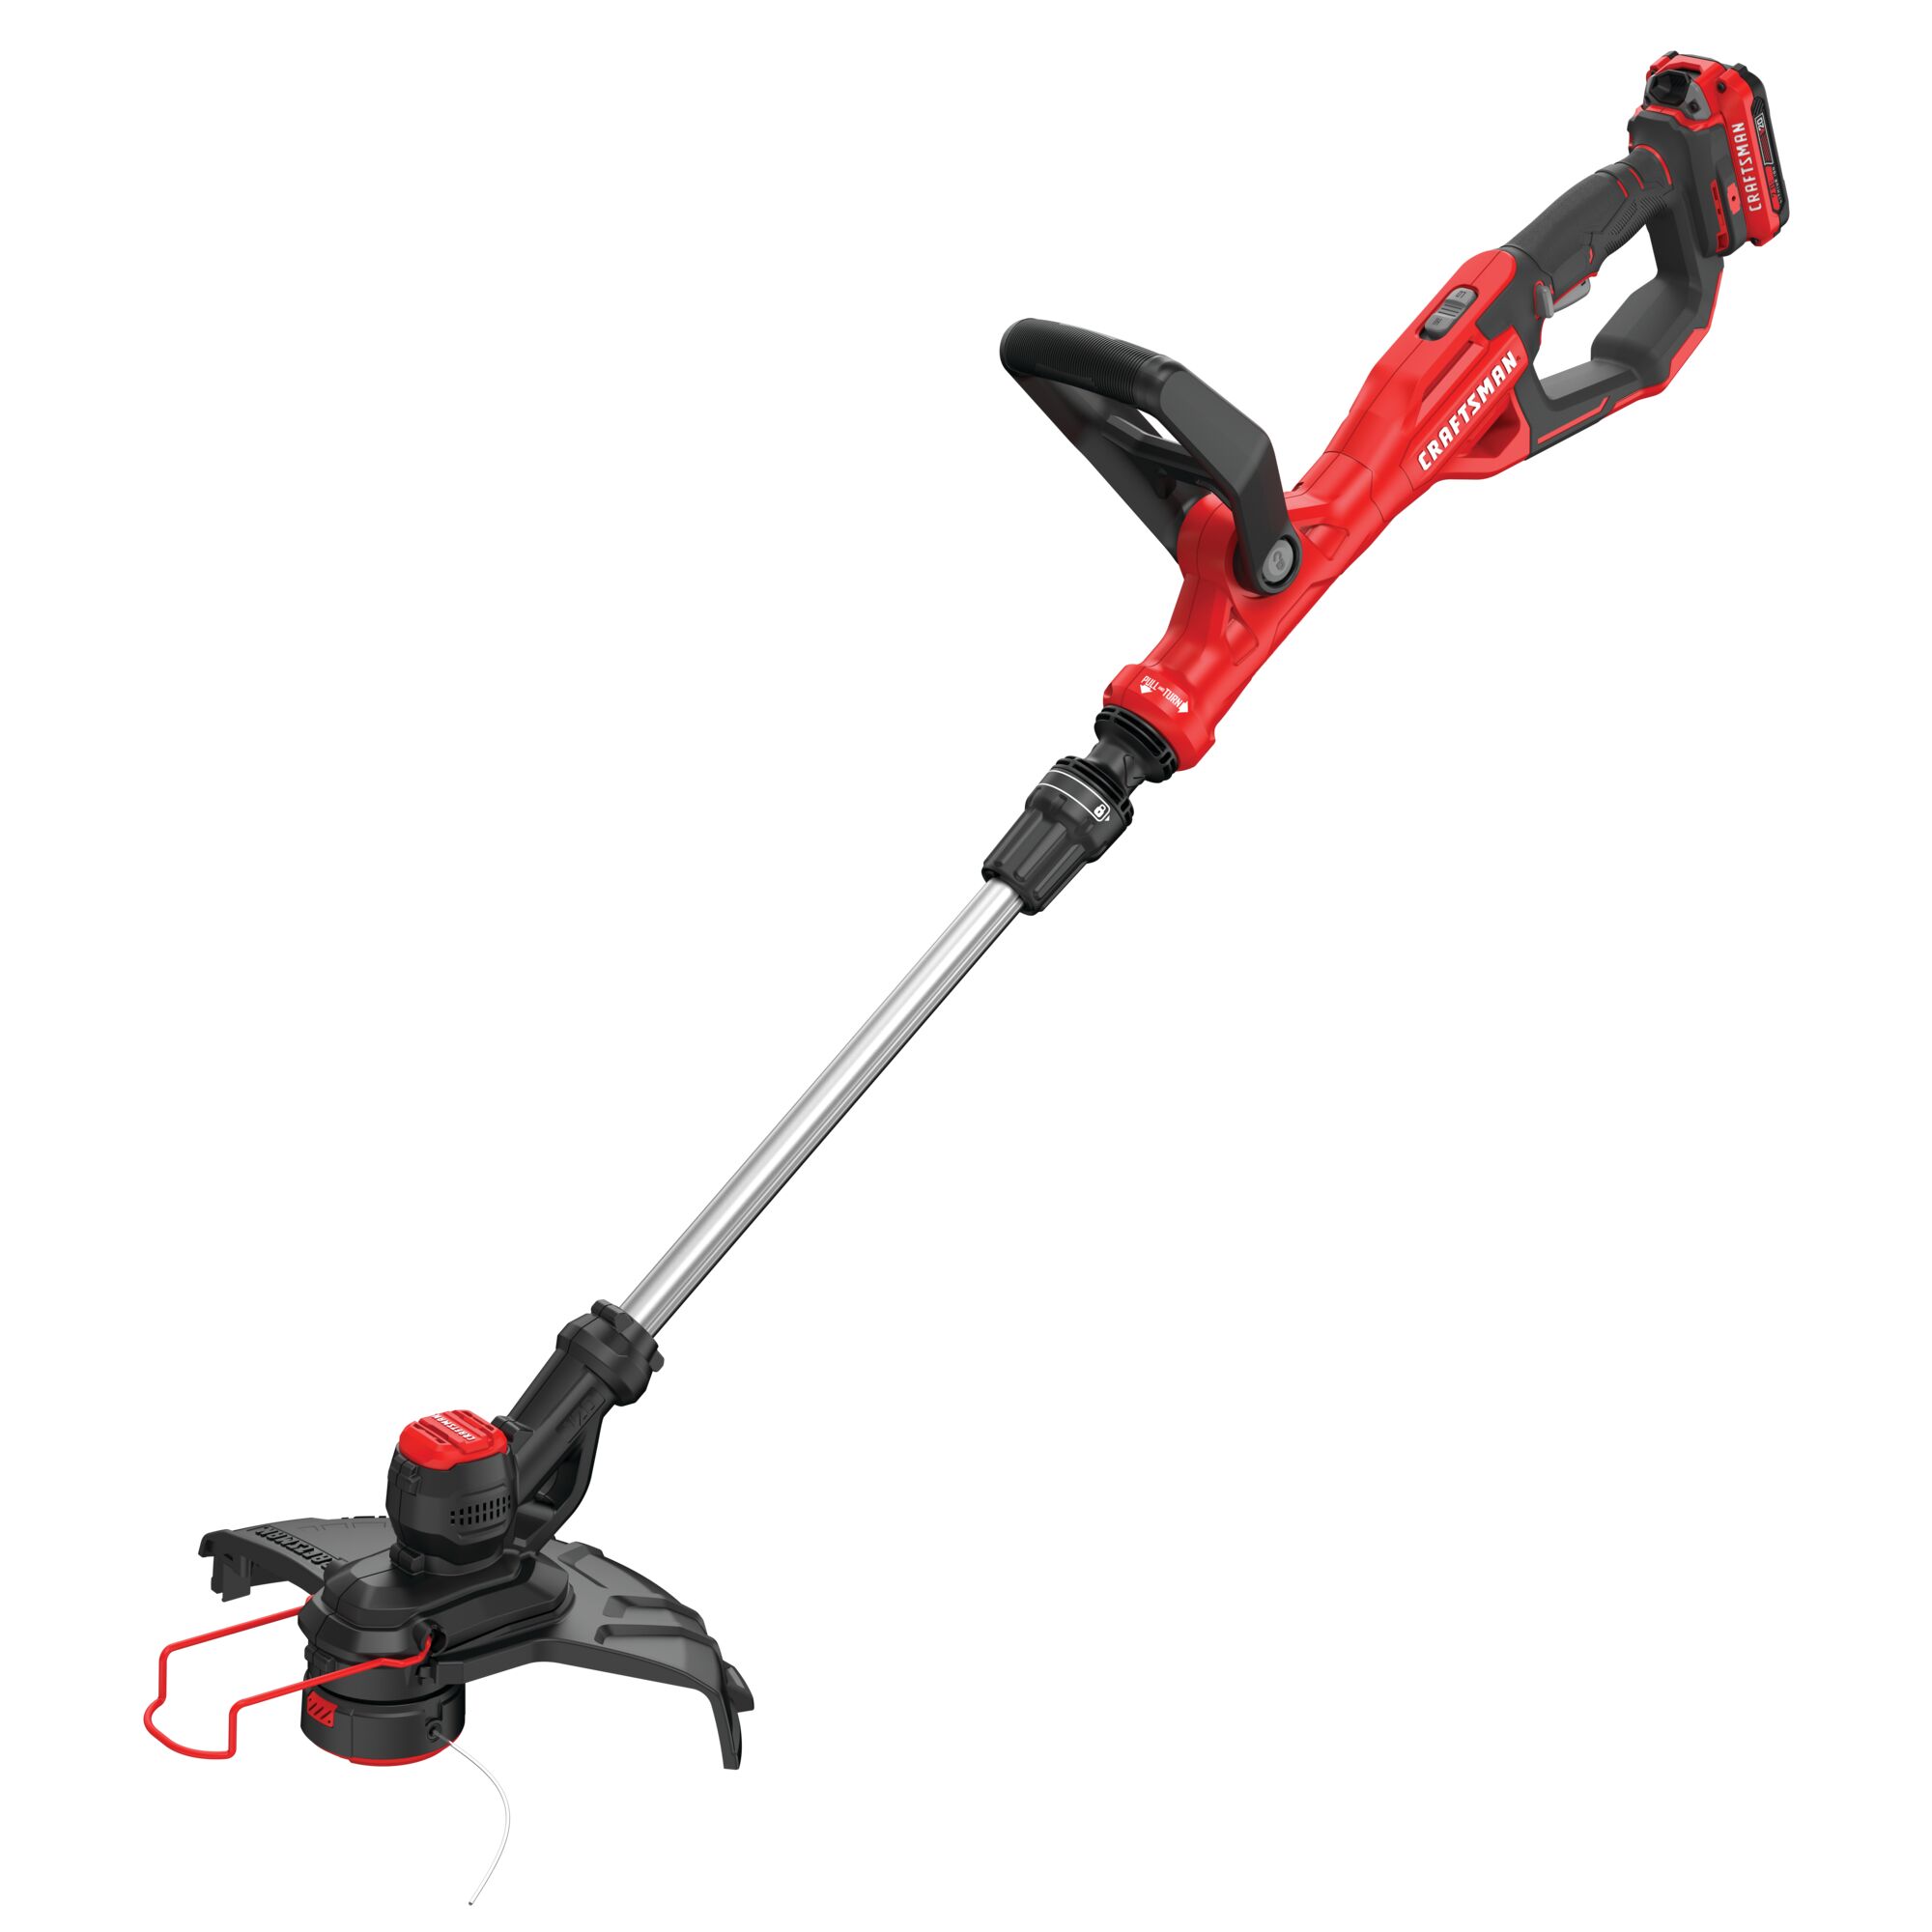 Left profile of 20 volt weedwacker 13 inch cordless string trimmer and edger with automatic feed kit.